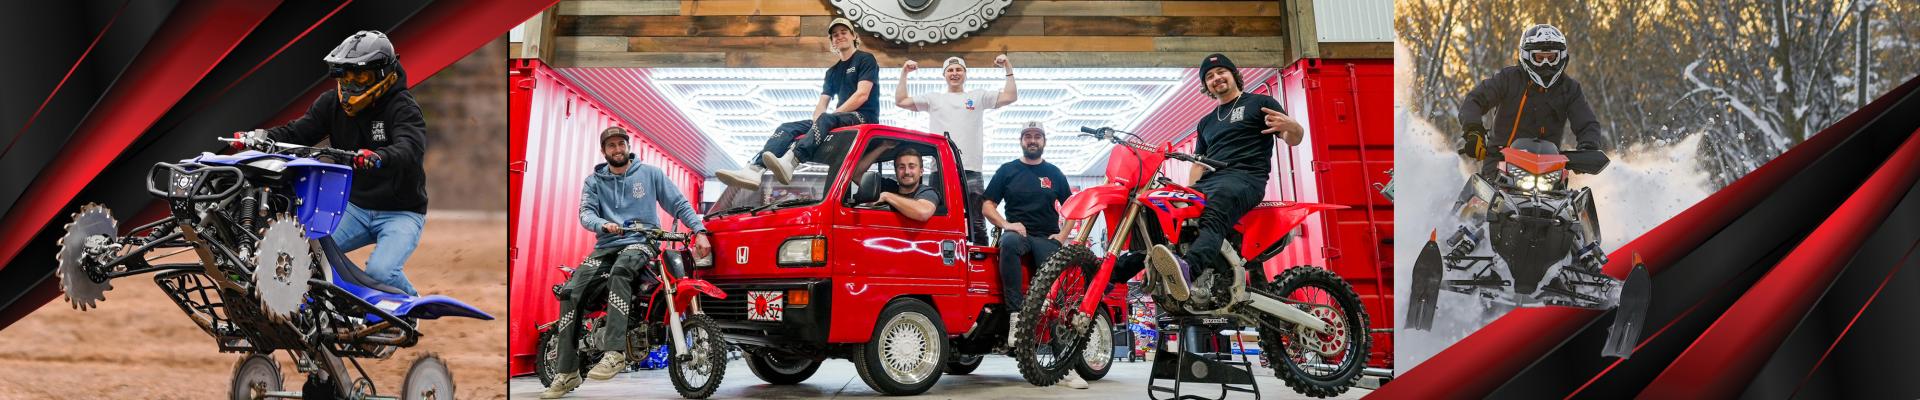 CboysTV with motorcycles and mini truck